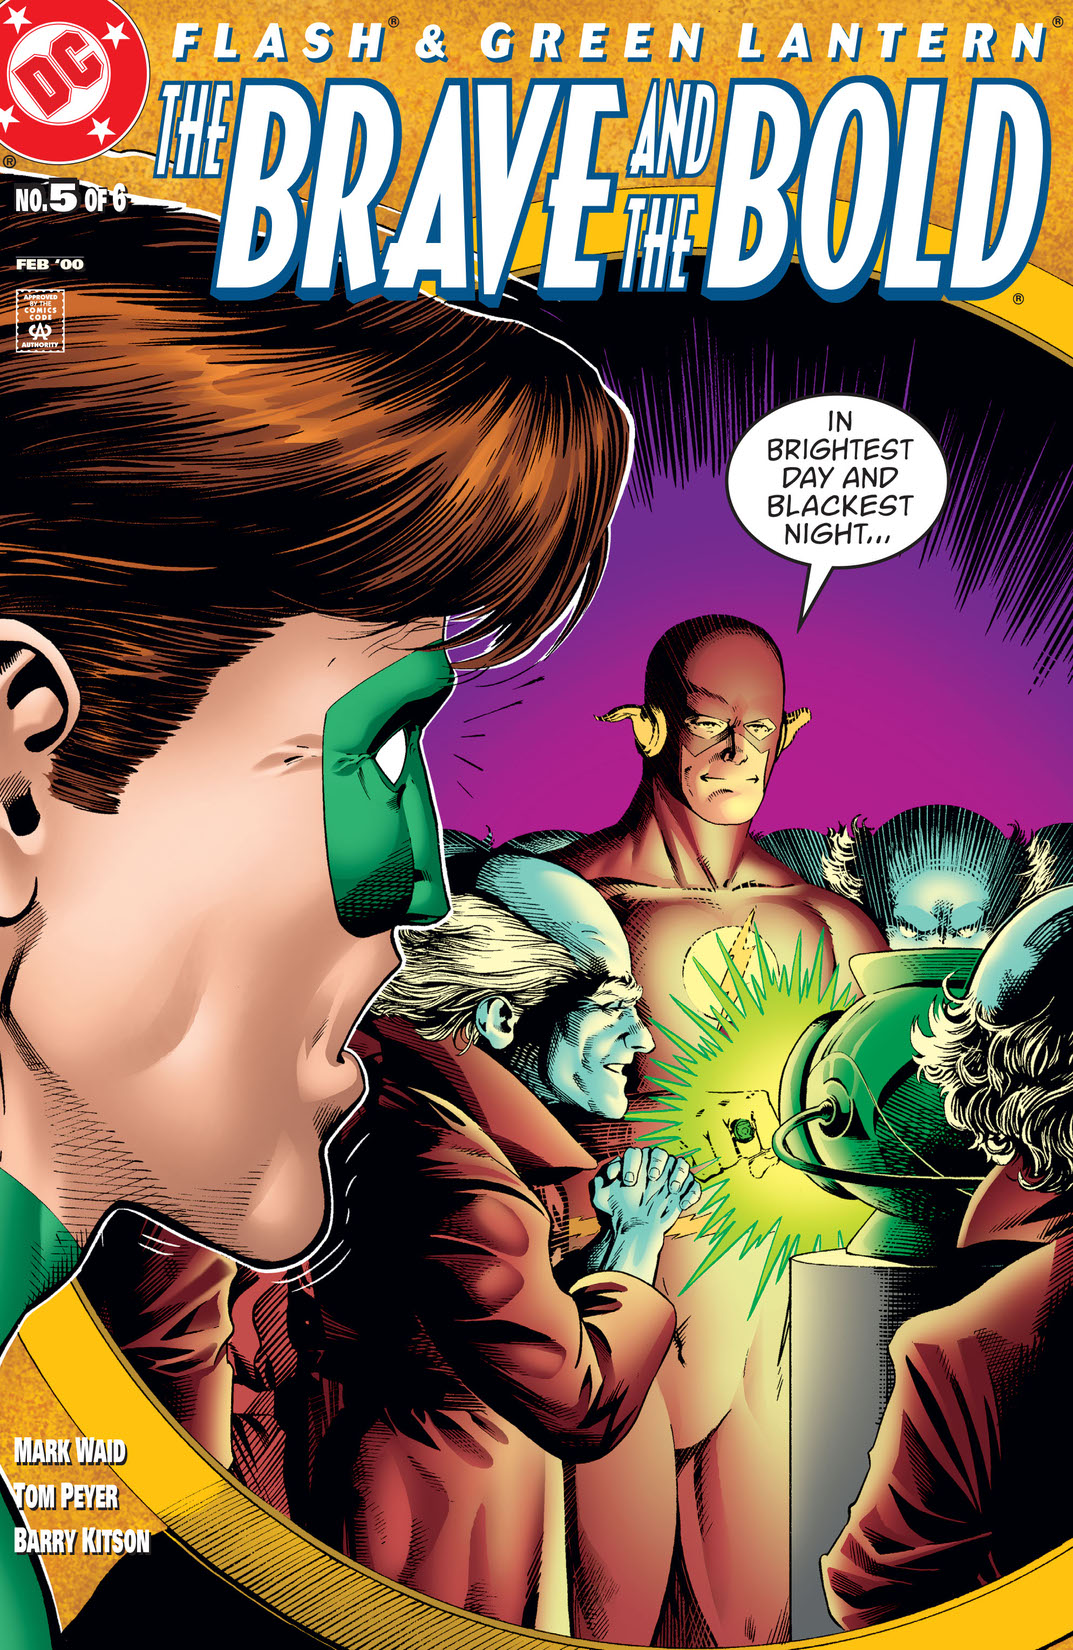 Flash & Green Lantern: The Brave & The Bold #5 preview images